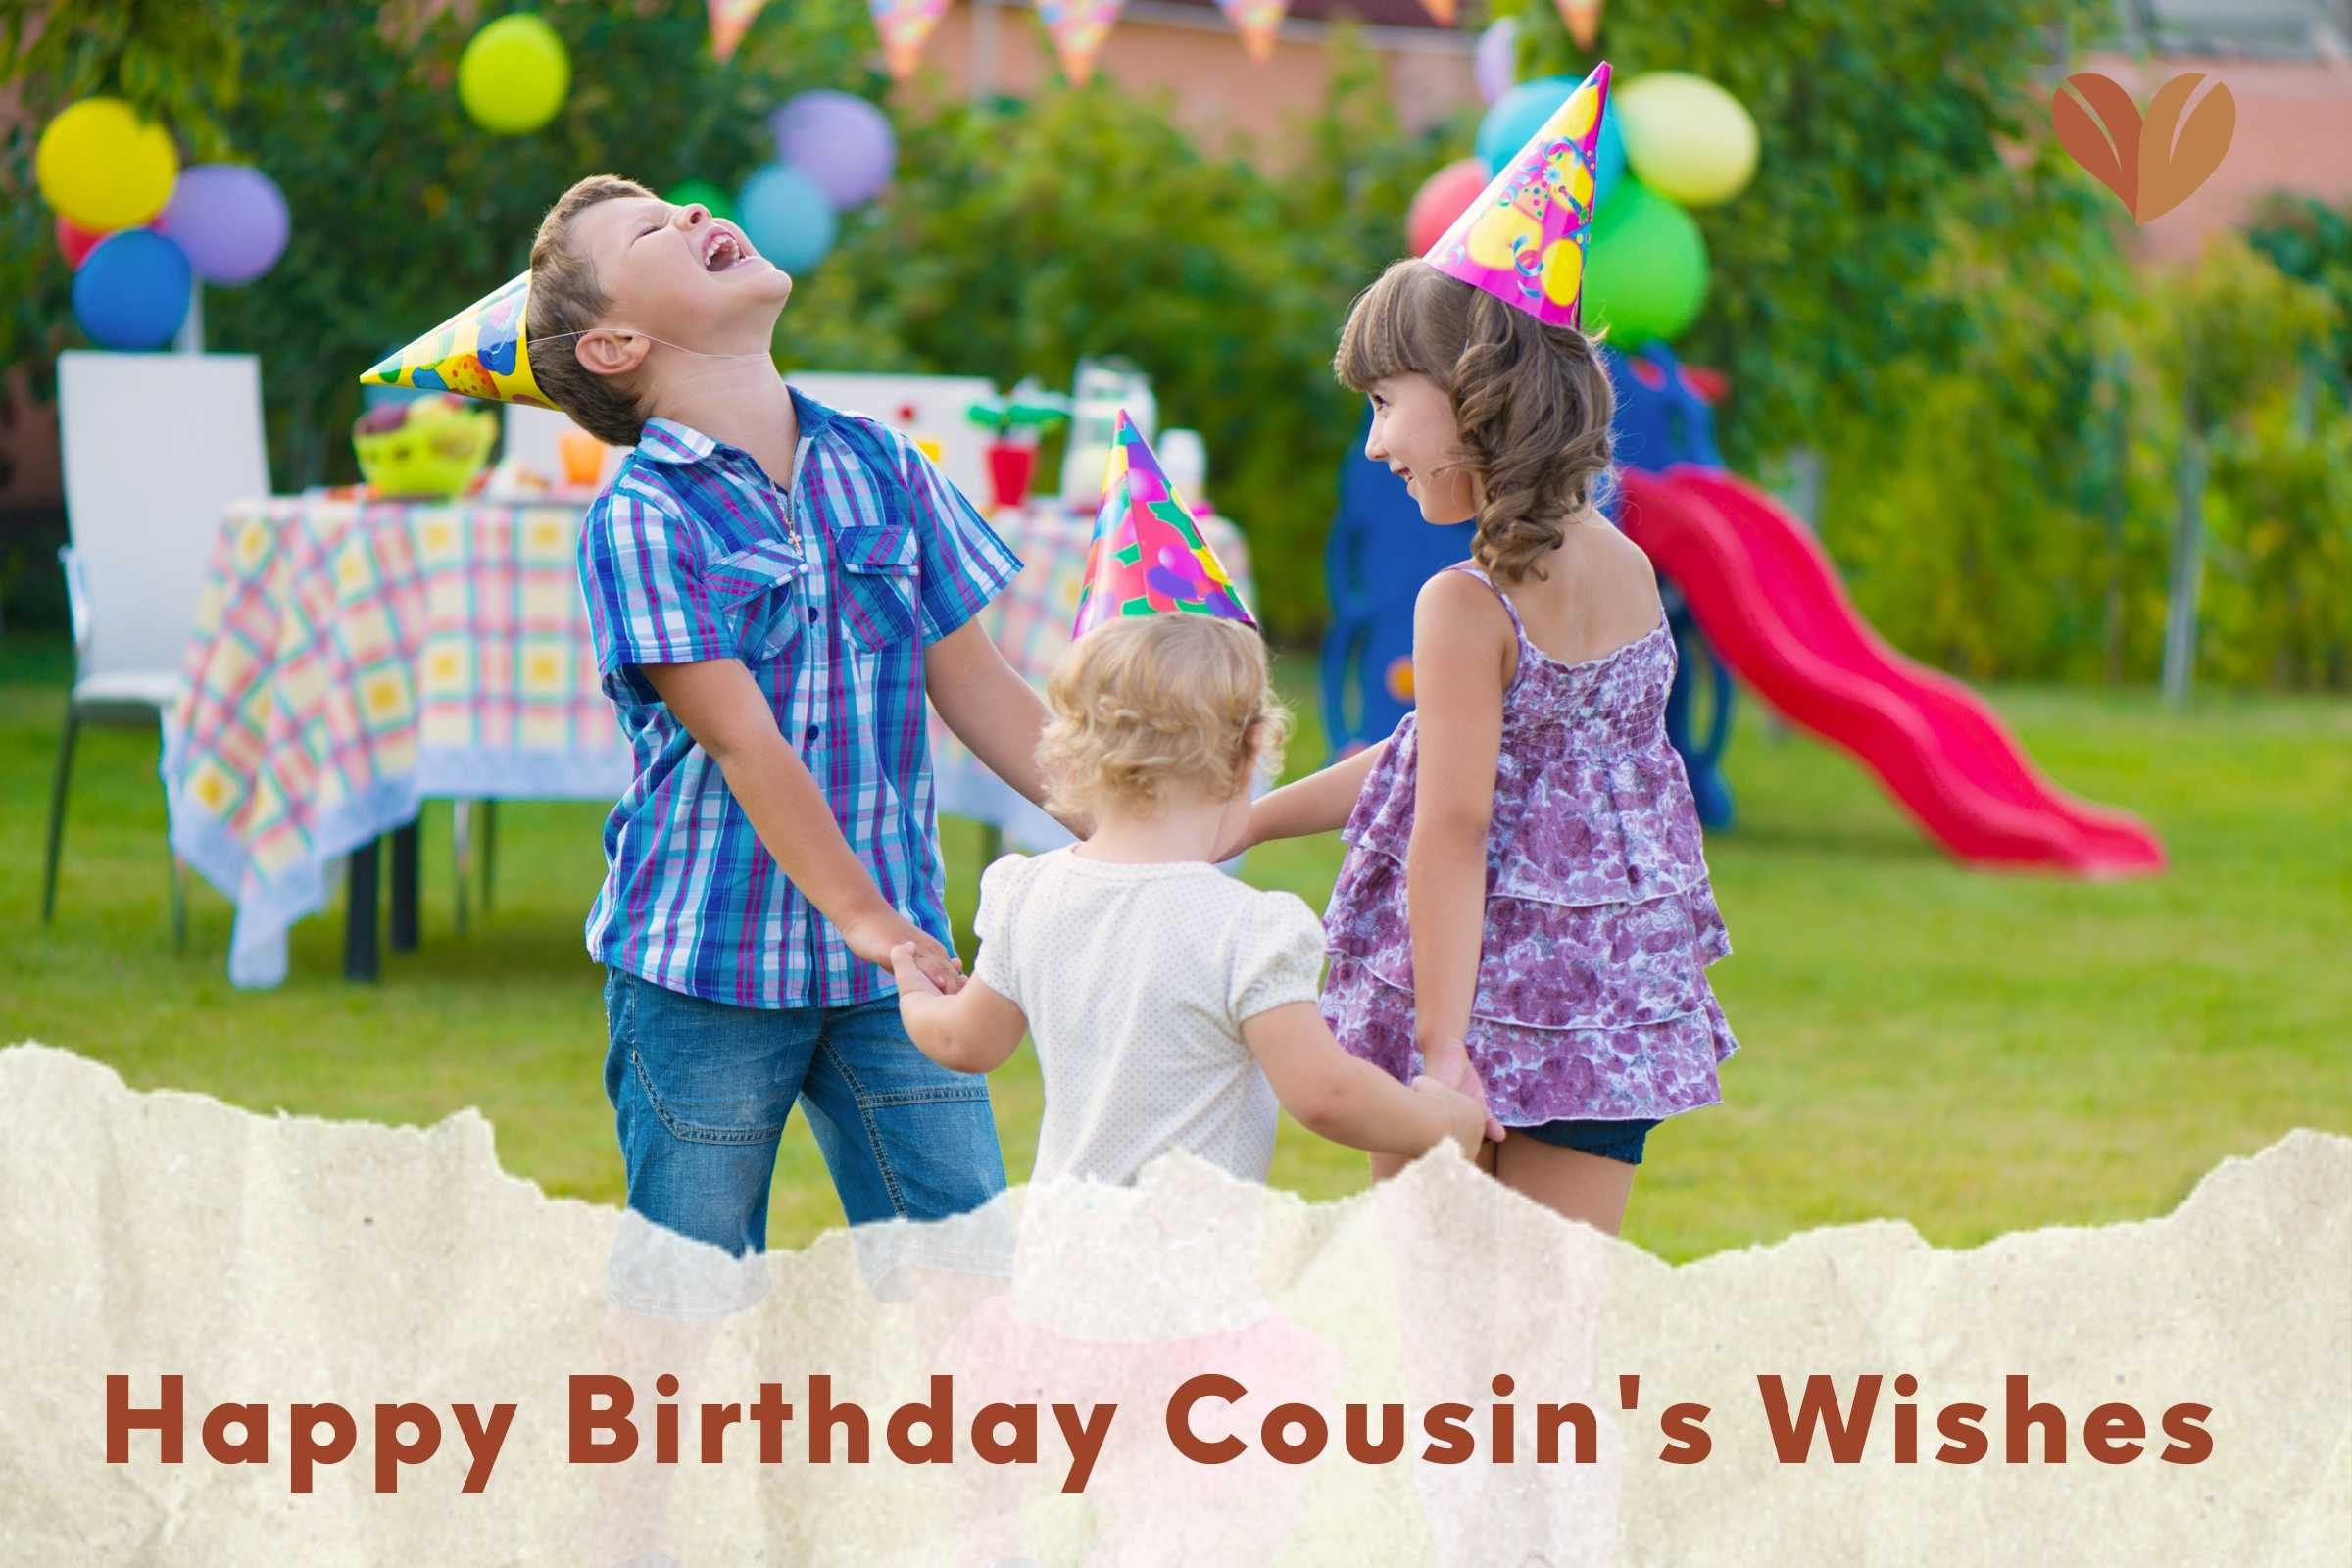 Cousin celebrations shine with heartfelt 'happy birthday cousin' wishes, a bond of love.